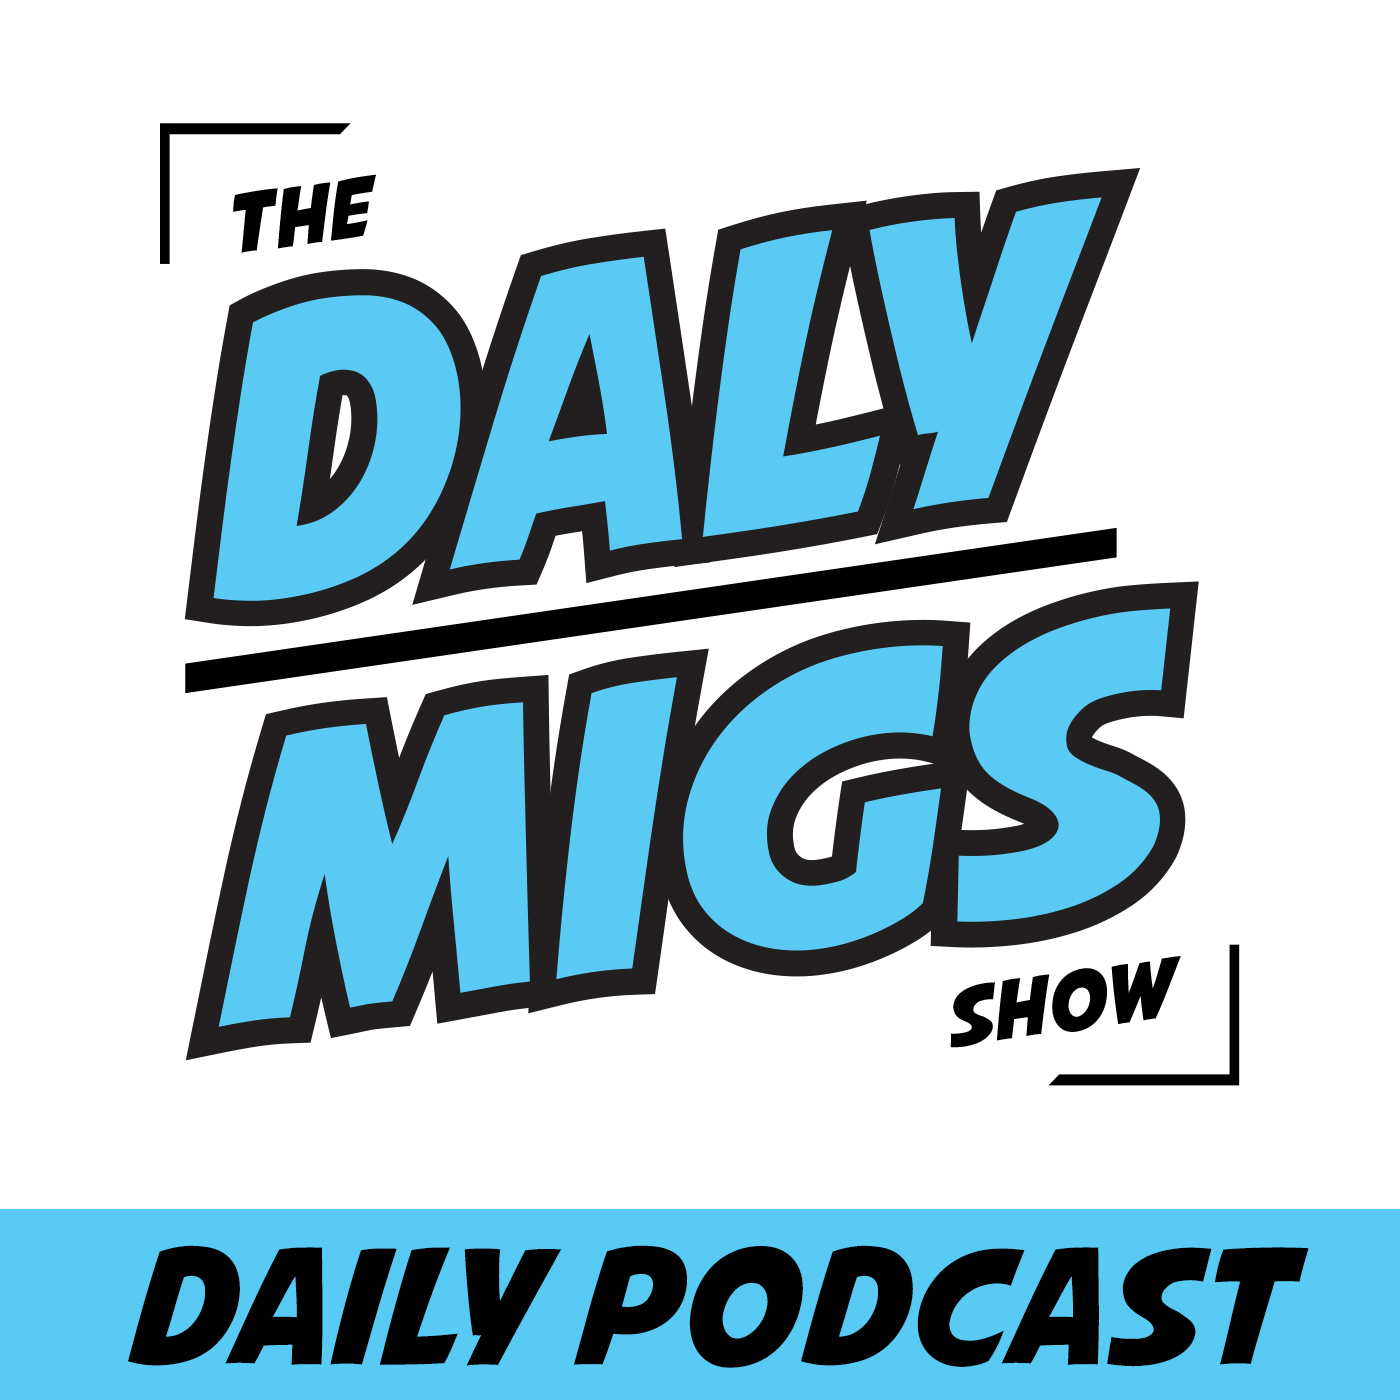 Daily Podcast pt. 2 - "What Simple Task Can You Not Do?"